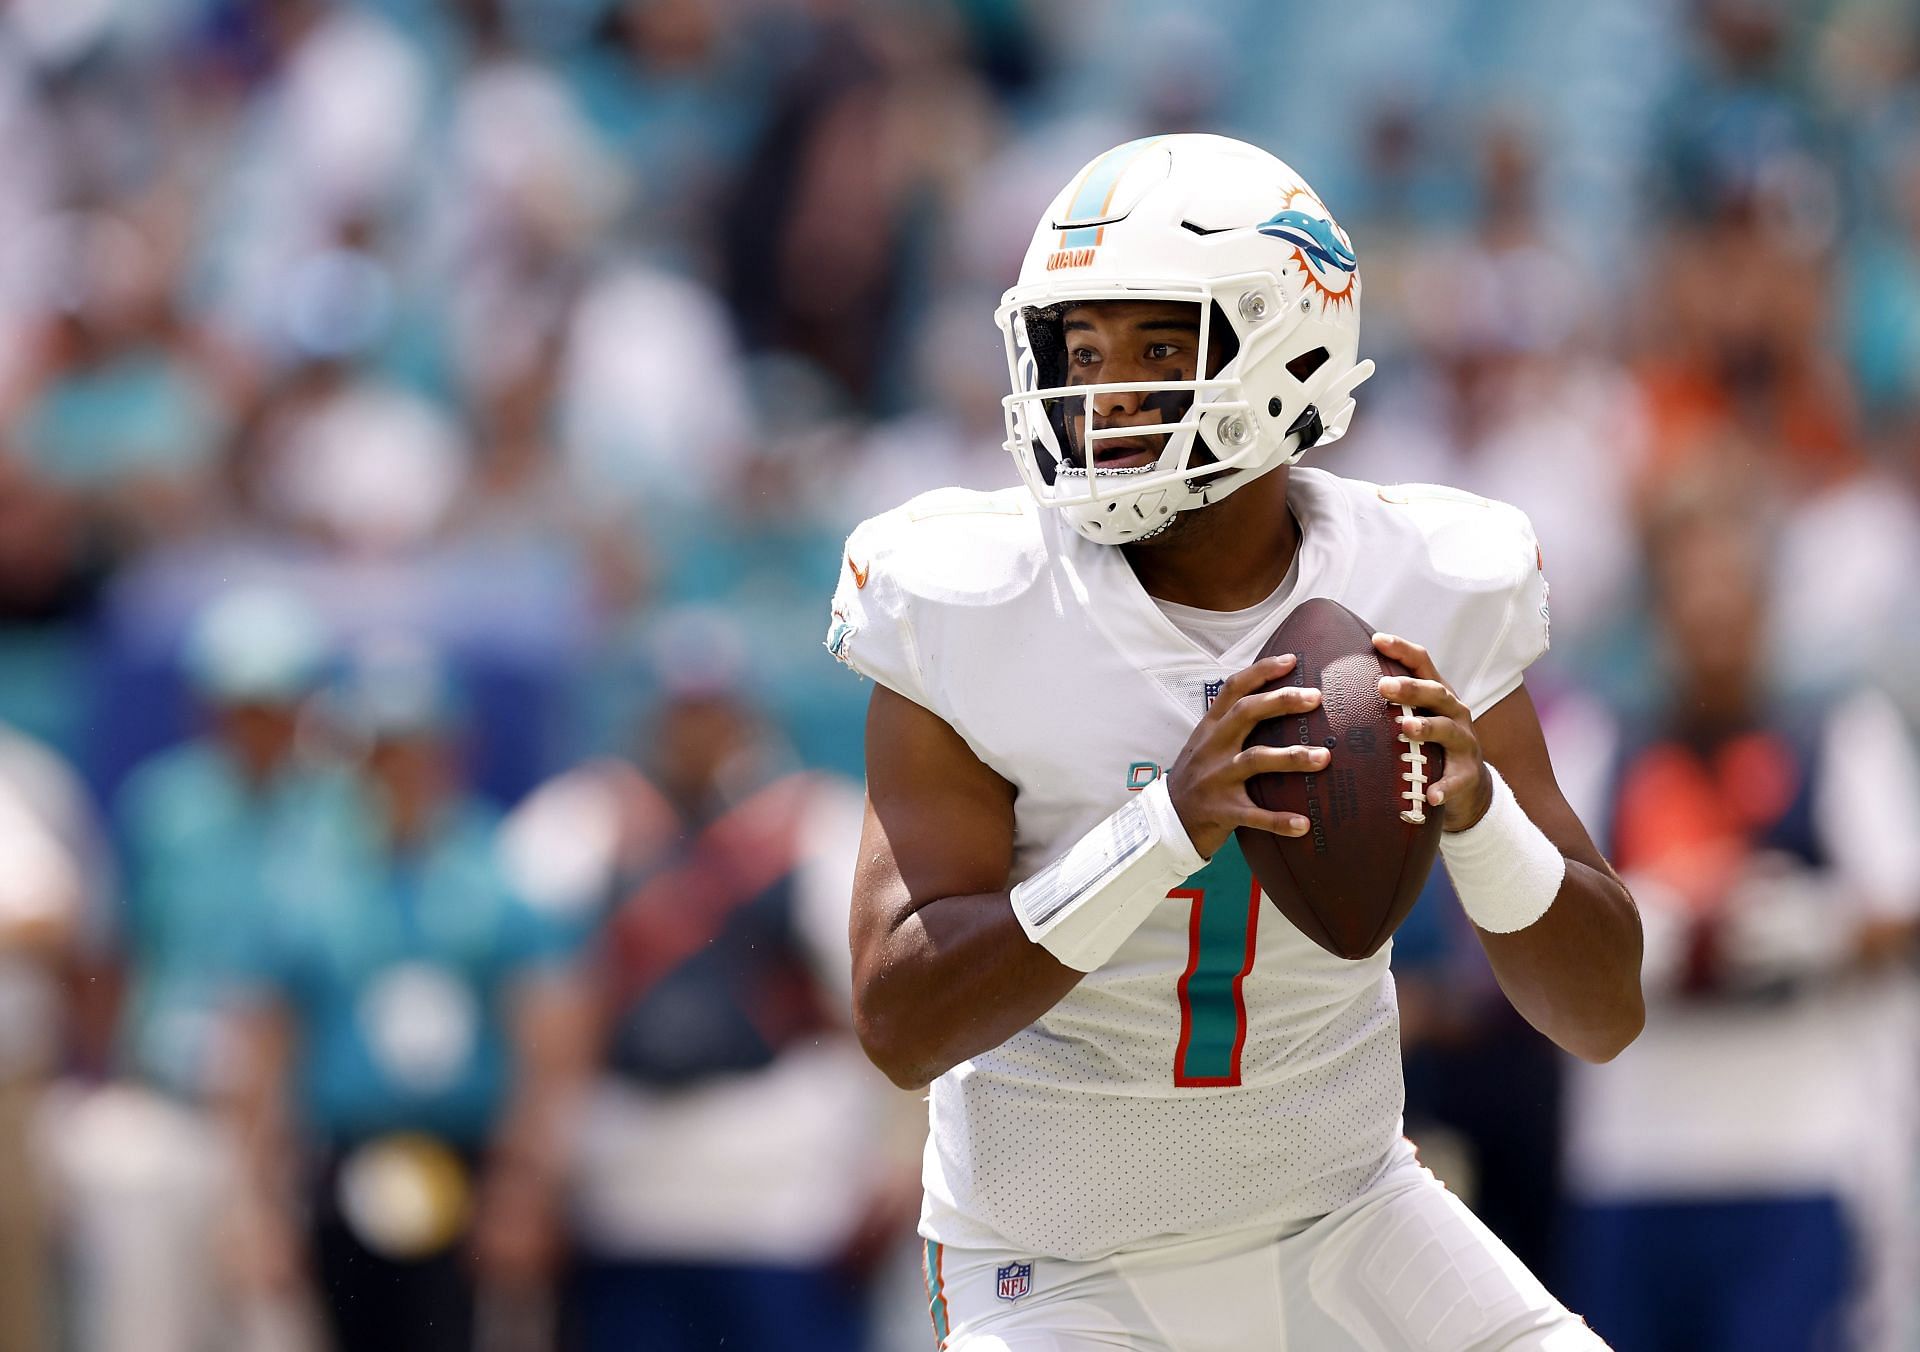 Tua Tagovailoa could be on his way out of Miami